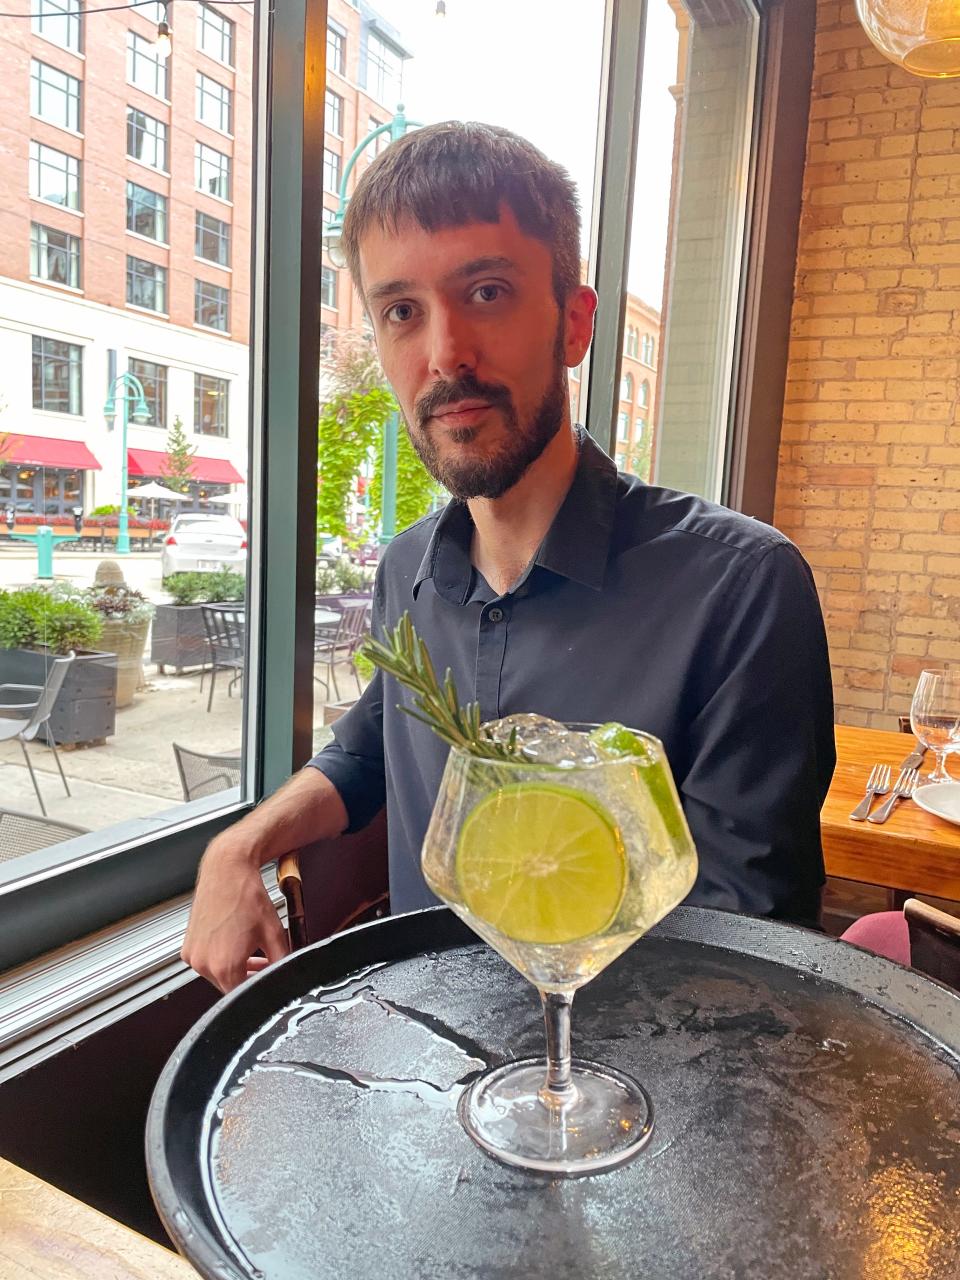 David Kiepert, the resident mixologist at Onesto, crafted this gin sangaree to pair with a course in the restaurant's four-course Castle & Key Cocktail Dinner on Sept. 19.